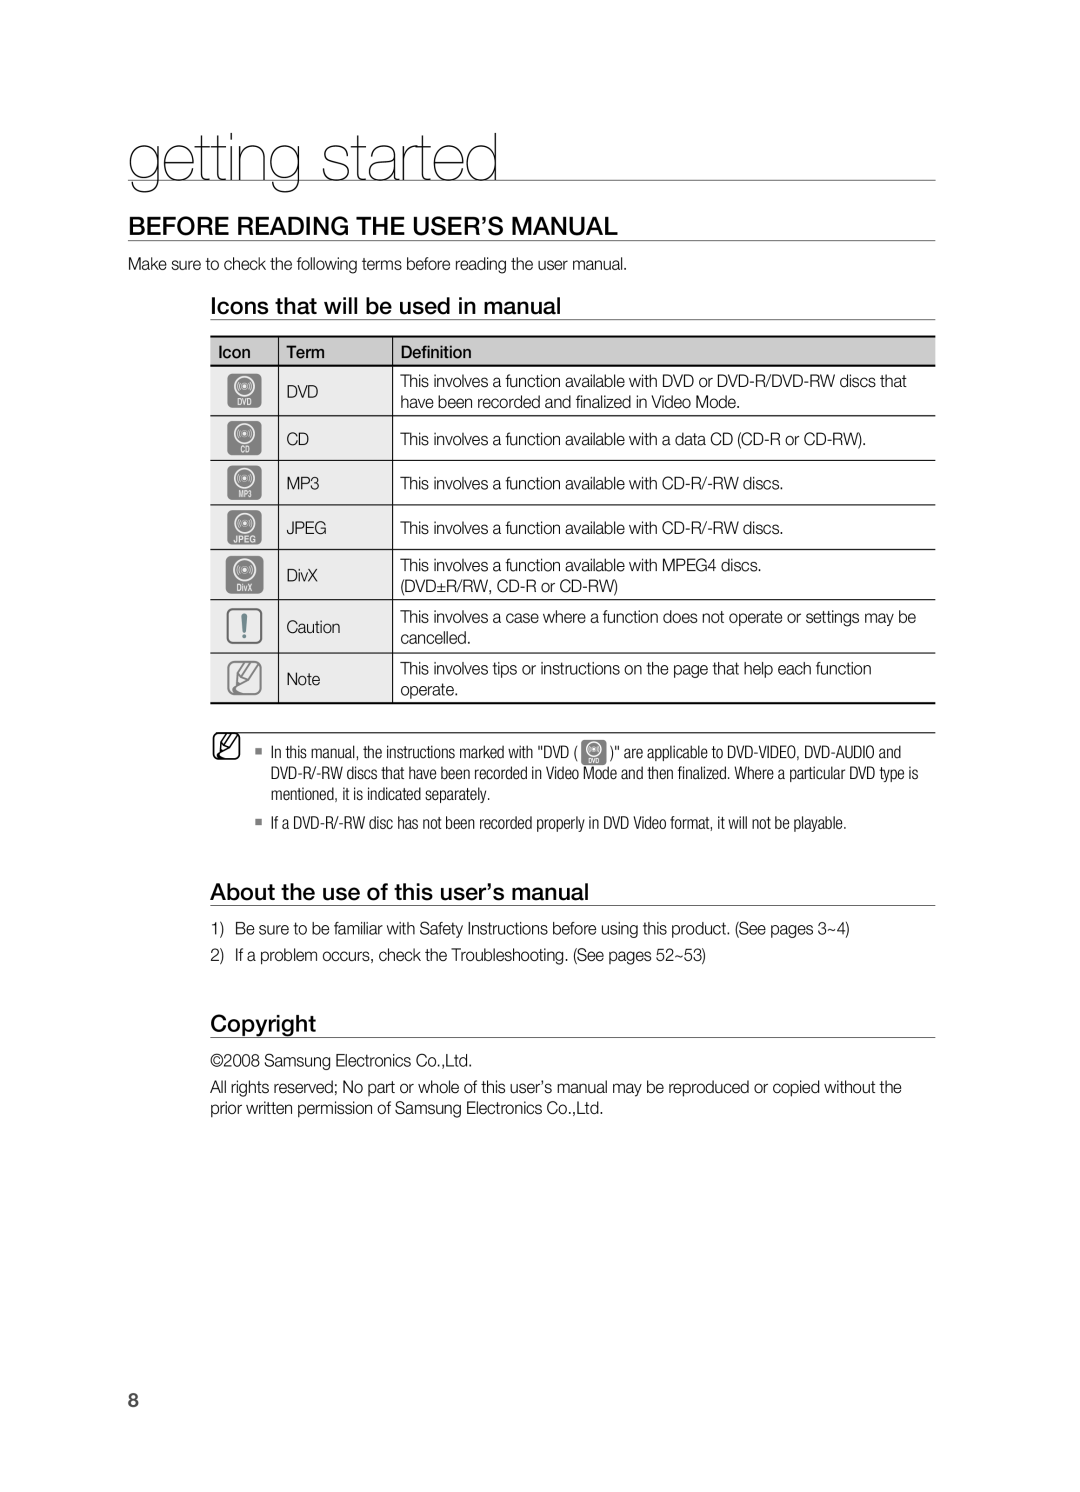 Sony HT-X810 user manual getting started, Before Reading the User’s Manual, Icons that will be used in manual, Copyright 